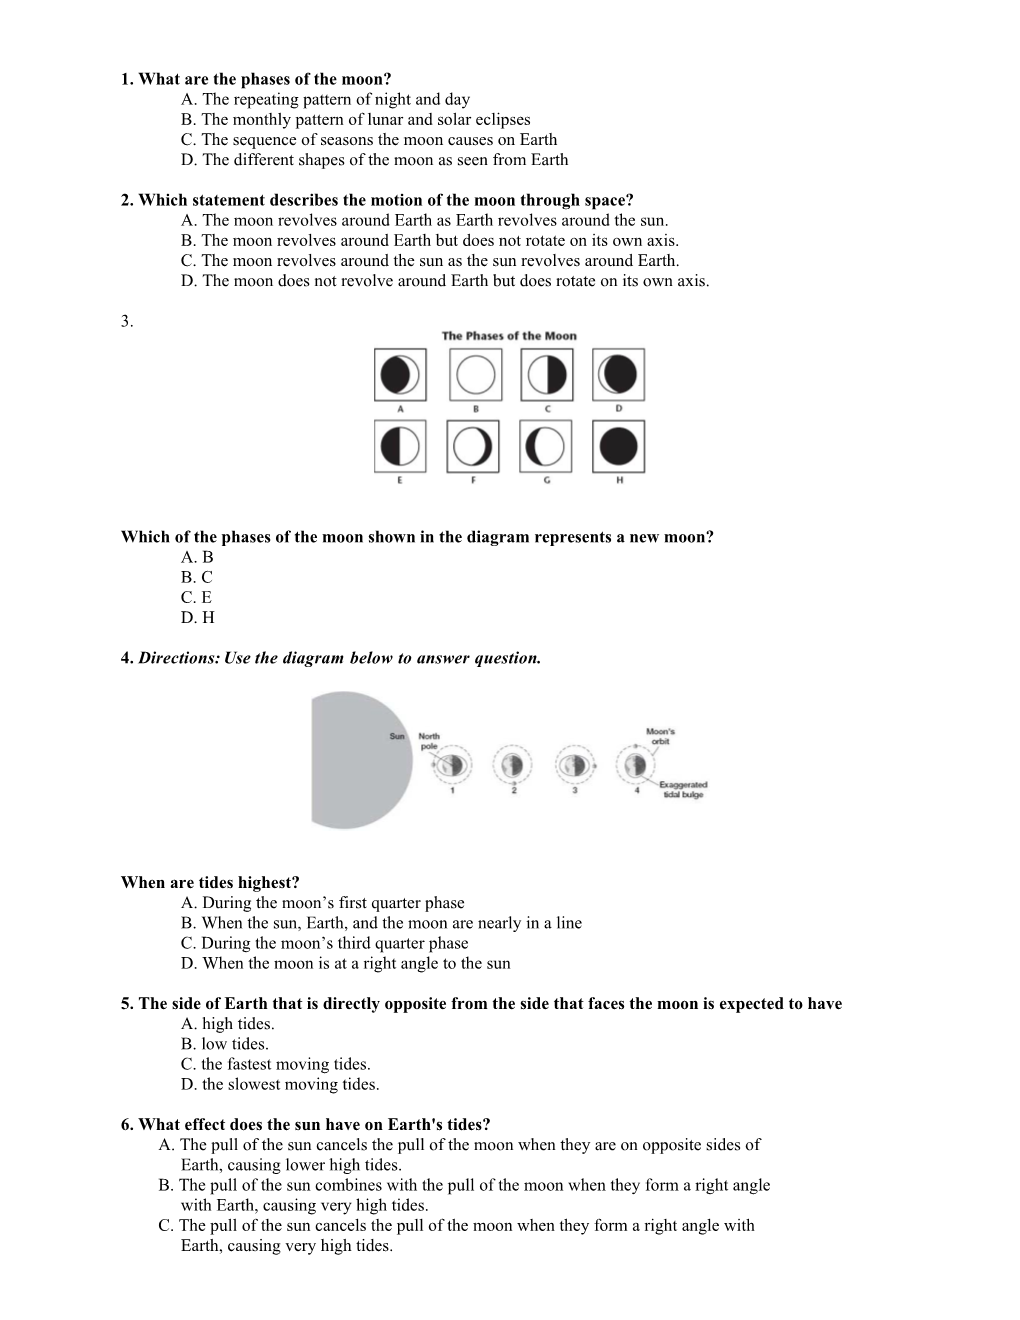 1. What Are the Phases of the Moon?